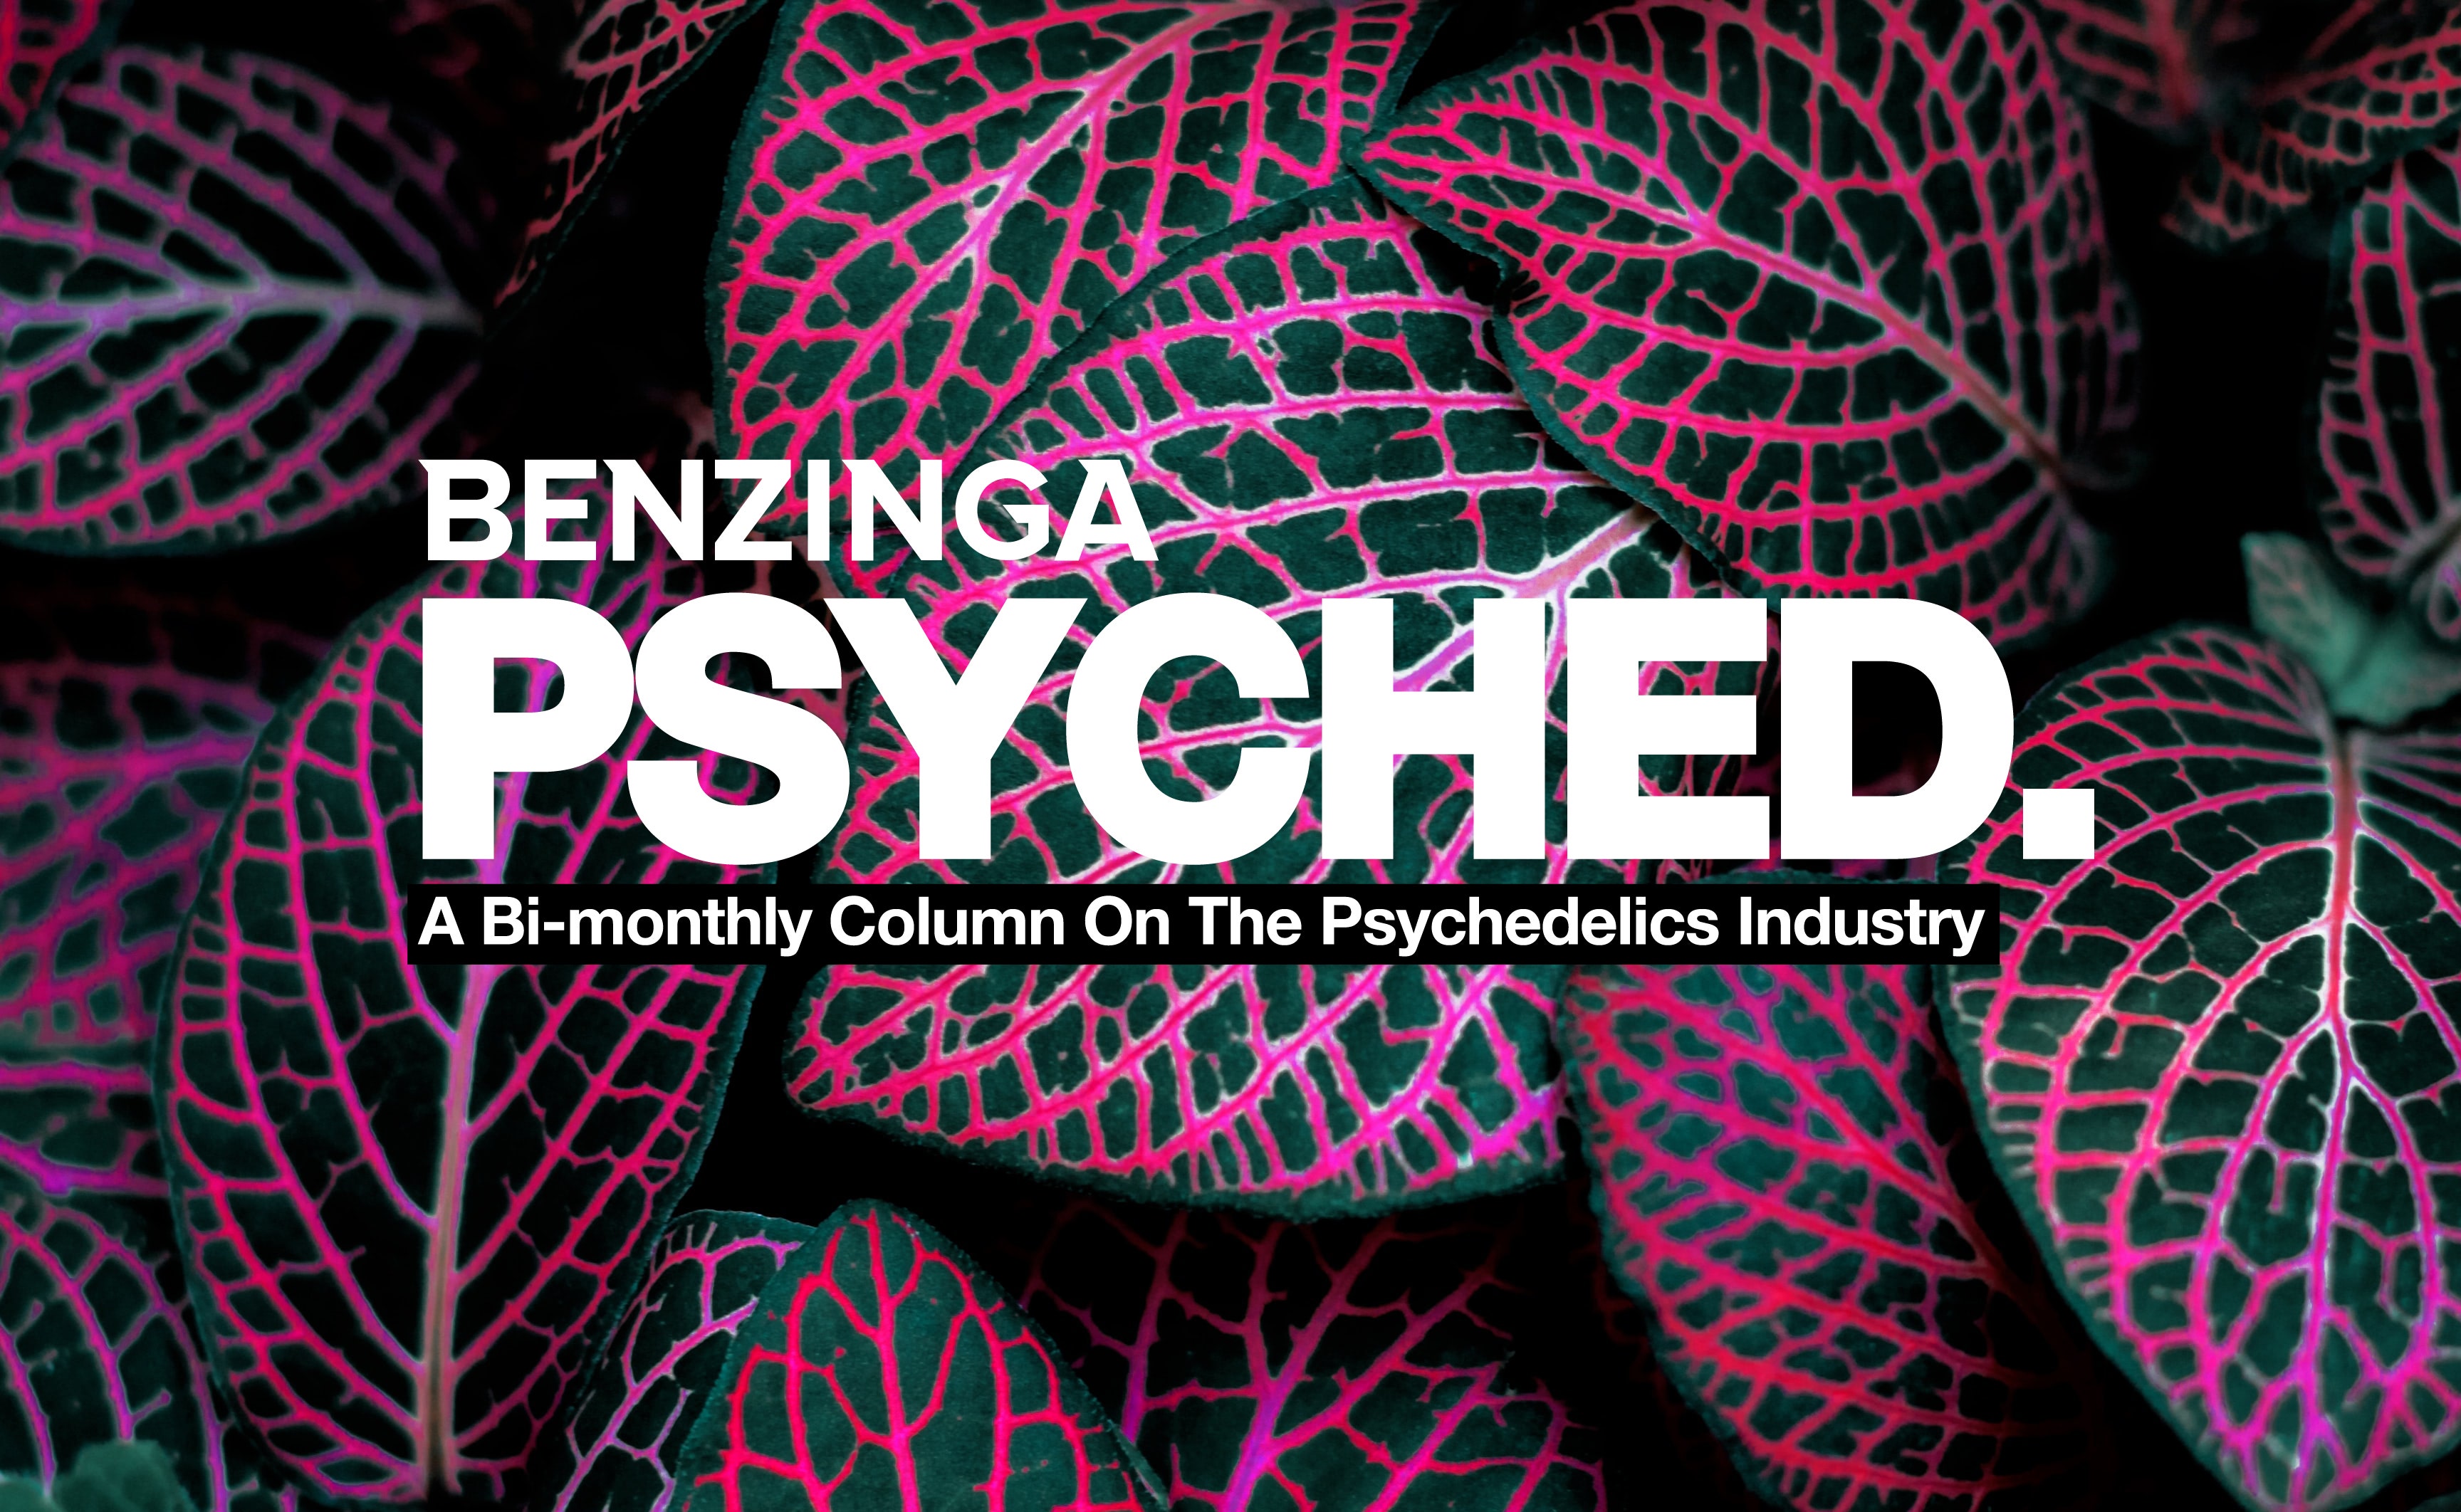 'Psyched': Mota Buys German Psilocybin Producer, Champignon Announces New CEO, $10M In Funding